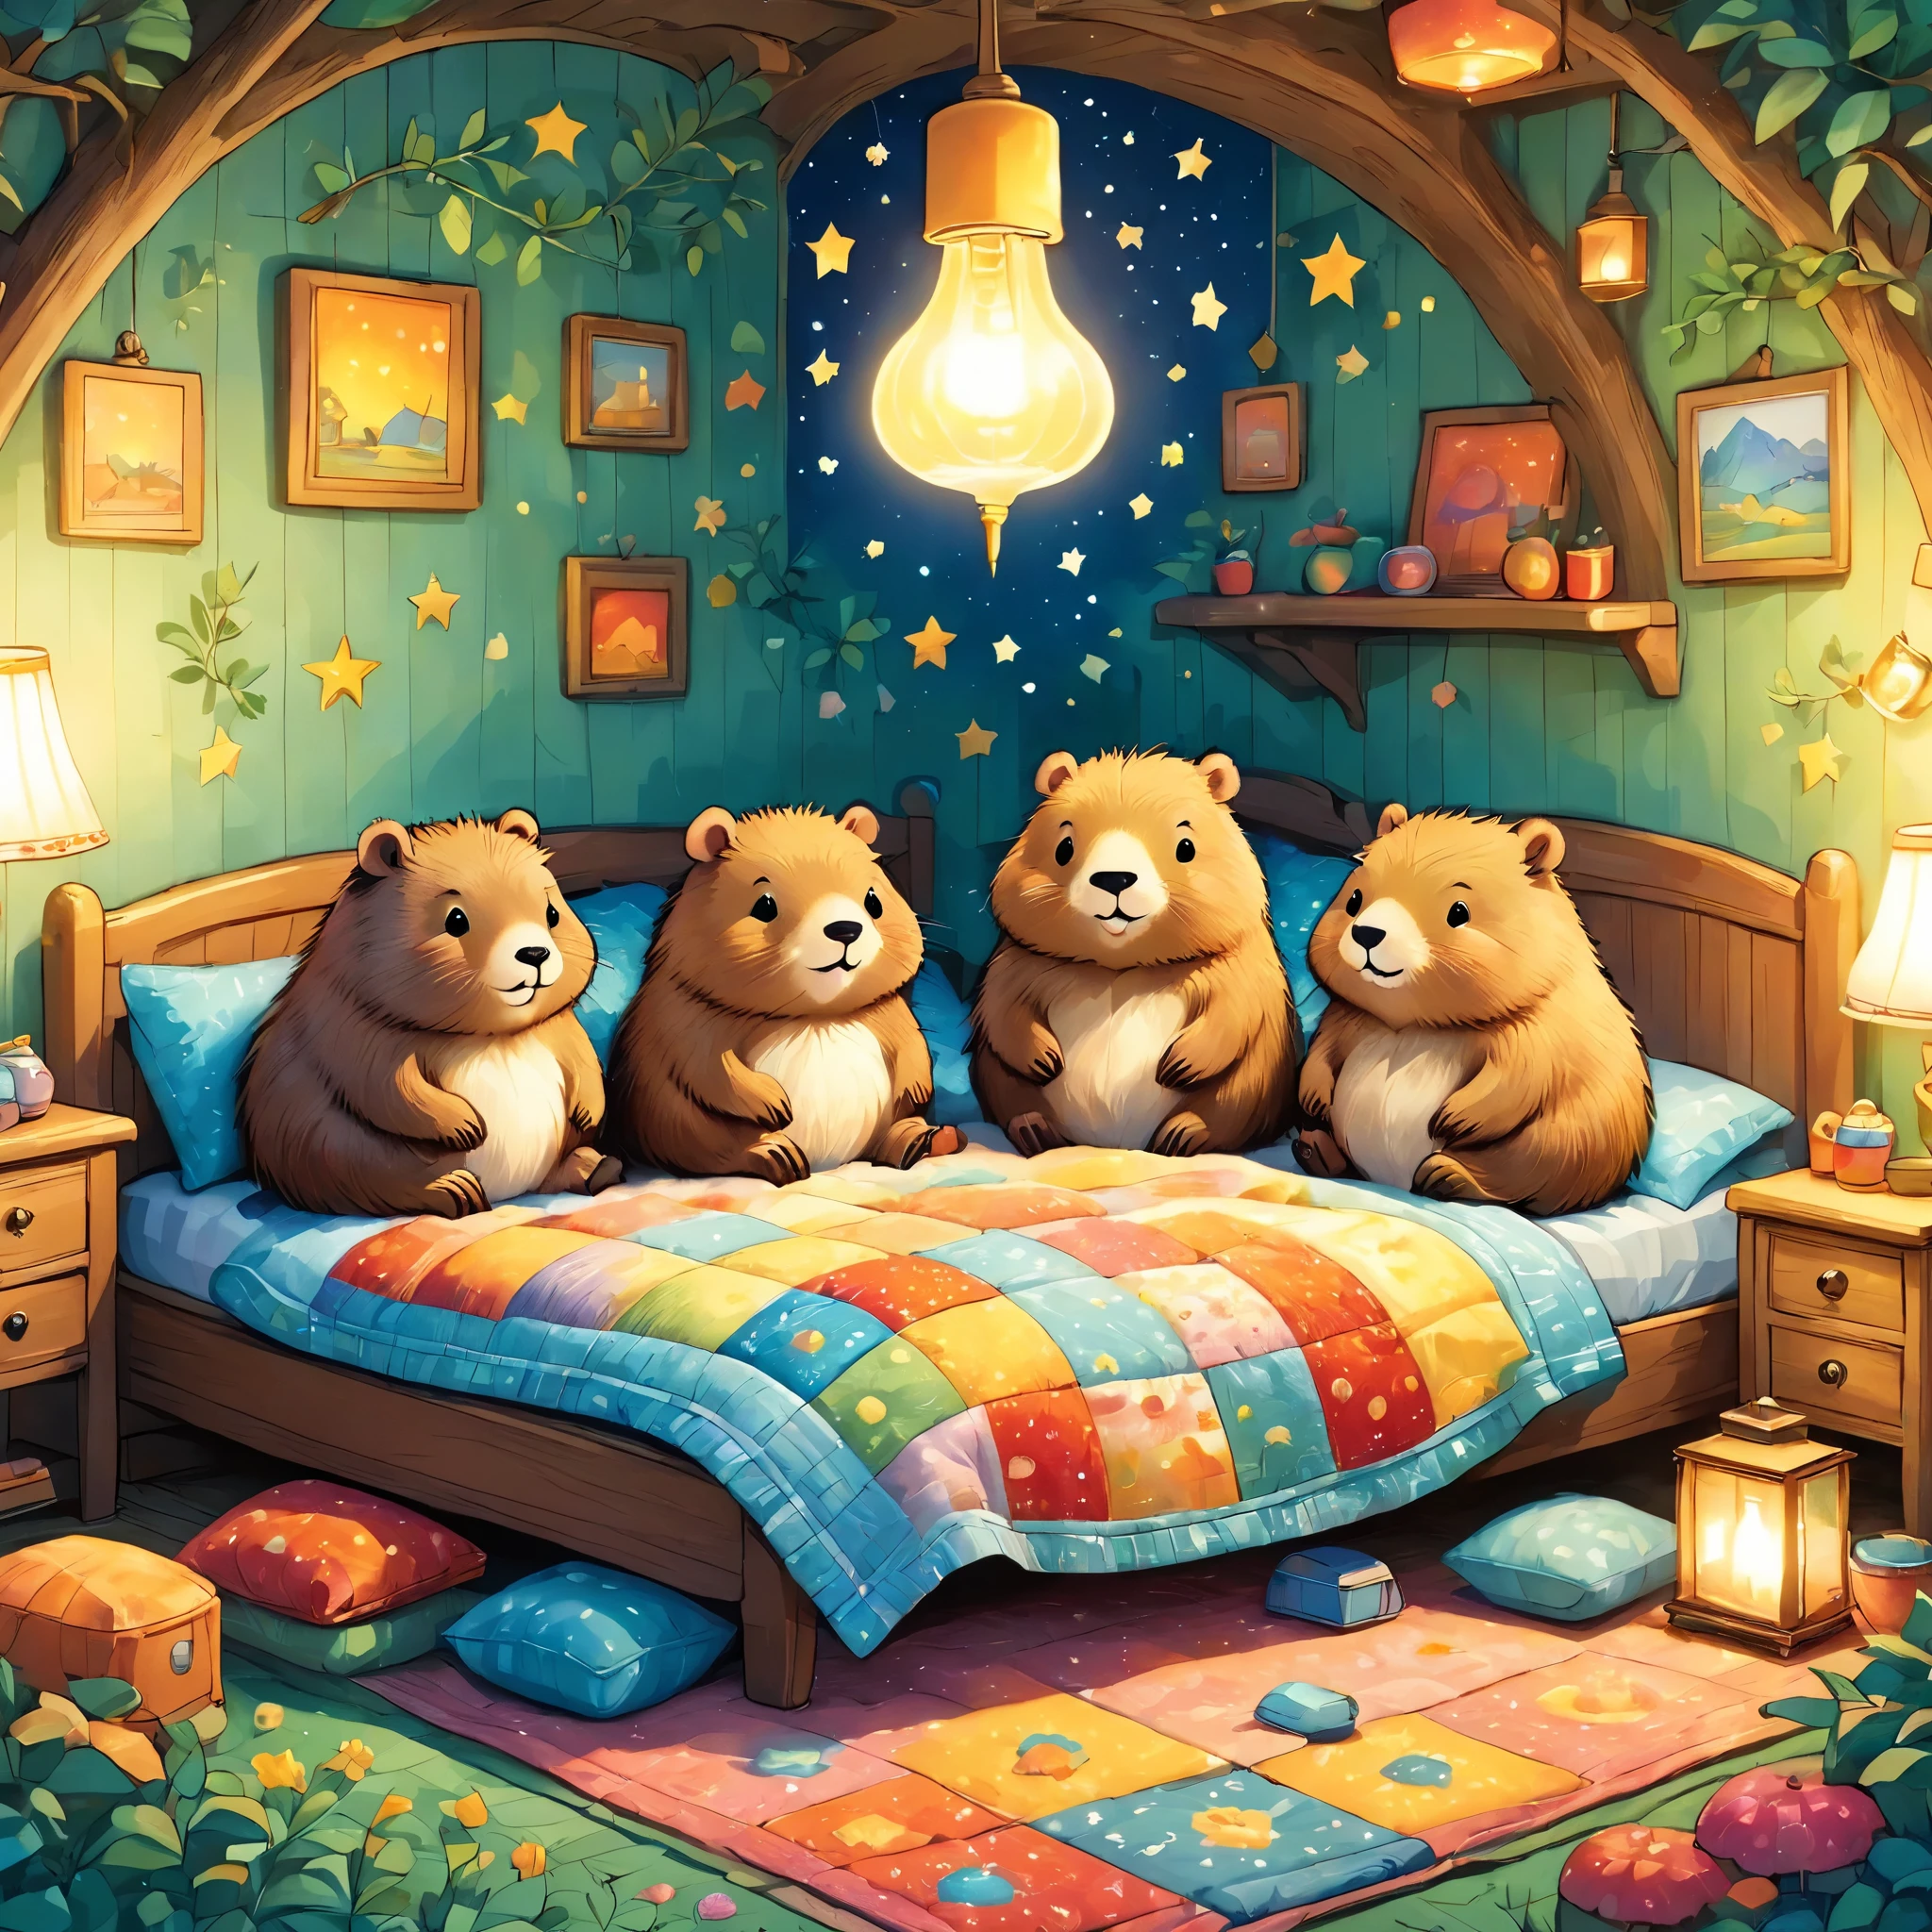 cuteAn illustrationカピバラの家,Capybara family:animal:hibernating:cute:Nestle:sleep:comfortable and warm:looks happy,An illustration,pop,colorfulに,draw with thick lines,color,dim,Lamp light,hibernatingのCapybara familyが眠っています:dream happy dreams,The house is warm and full of happiness,,colorful,Fancy,Fantasy,patchwork:quilt,detailed details,fluffy,Randolph Caldecott Style,豊富なcolor,Cast colorful spells,concentrated,The best configuration,Perfect composition,accent,子供が喜ぶAn illustration,For kids,feel warm,wonderful like a dream,Happy and fun looking capybaras,Little,Cast colorful spells,Sparkling,Anatomically correct,scarf,pajamas